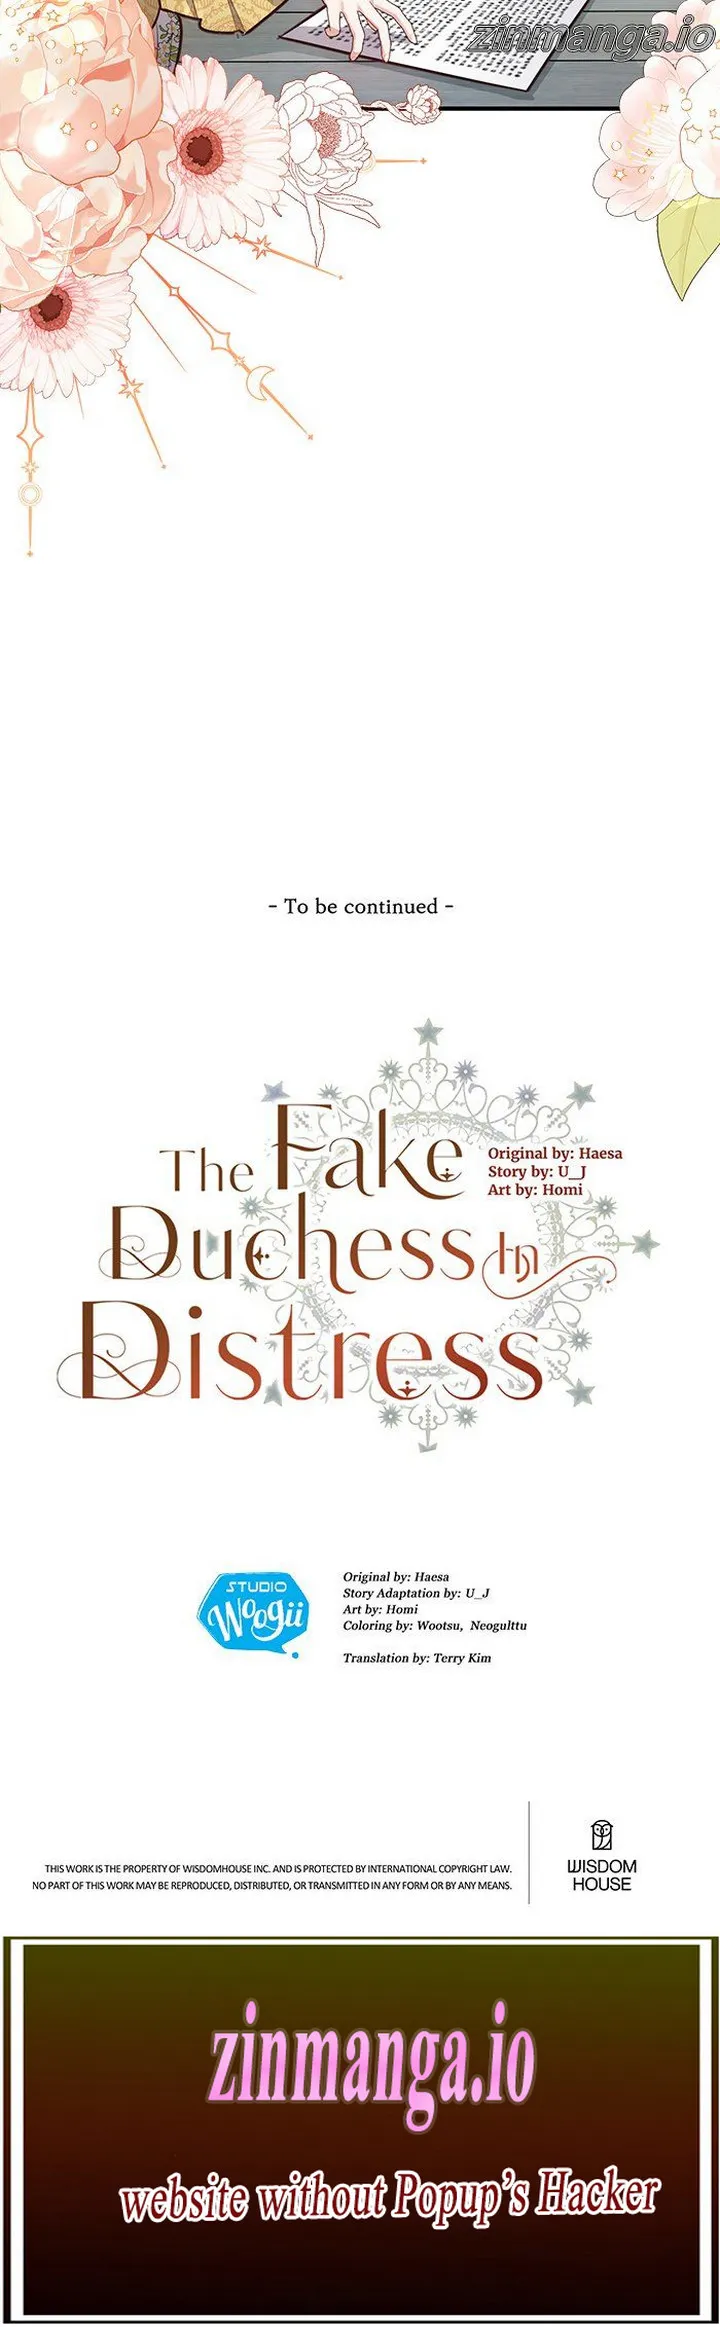 The Fake Duchess In Distresss chapter 36